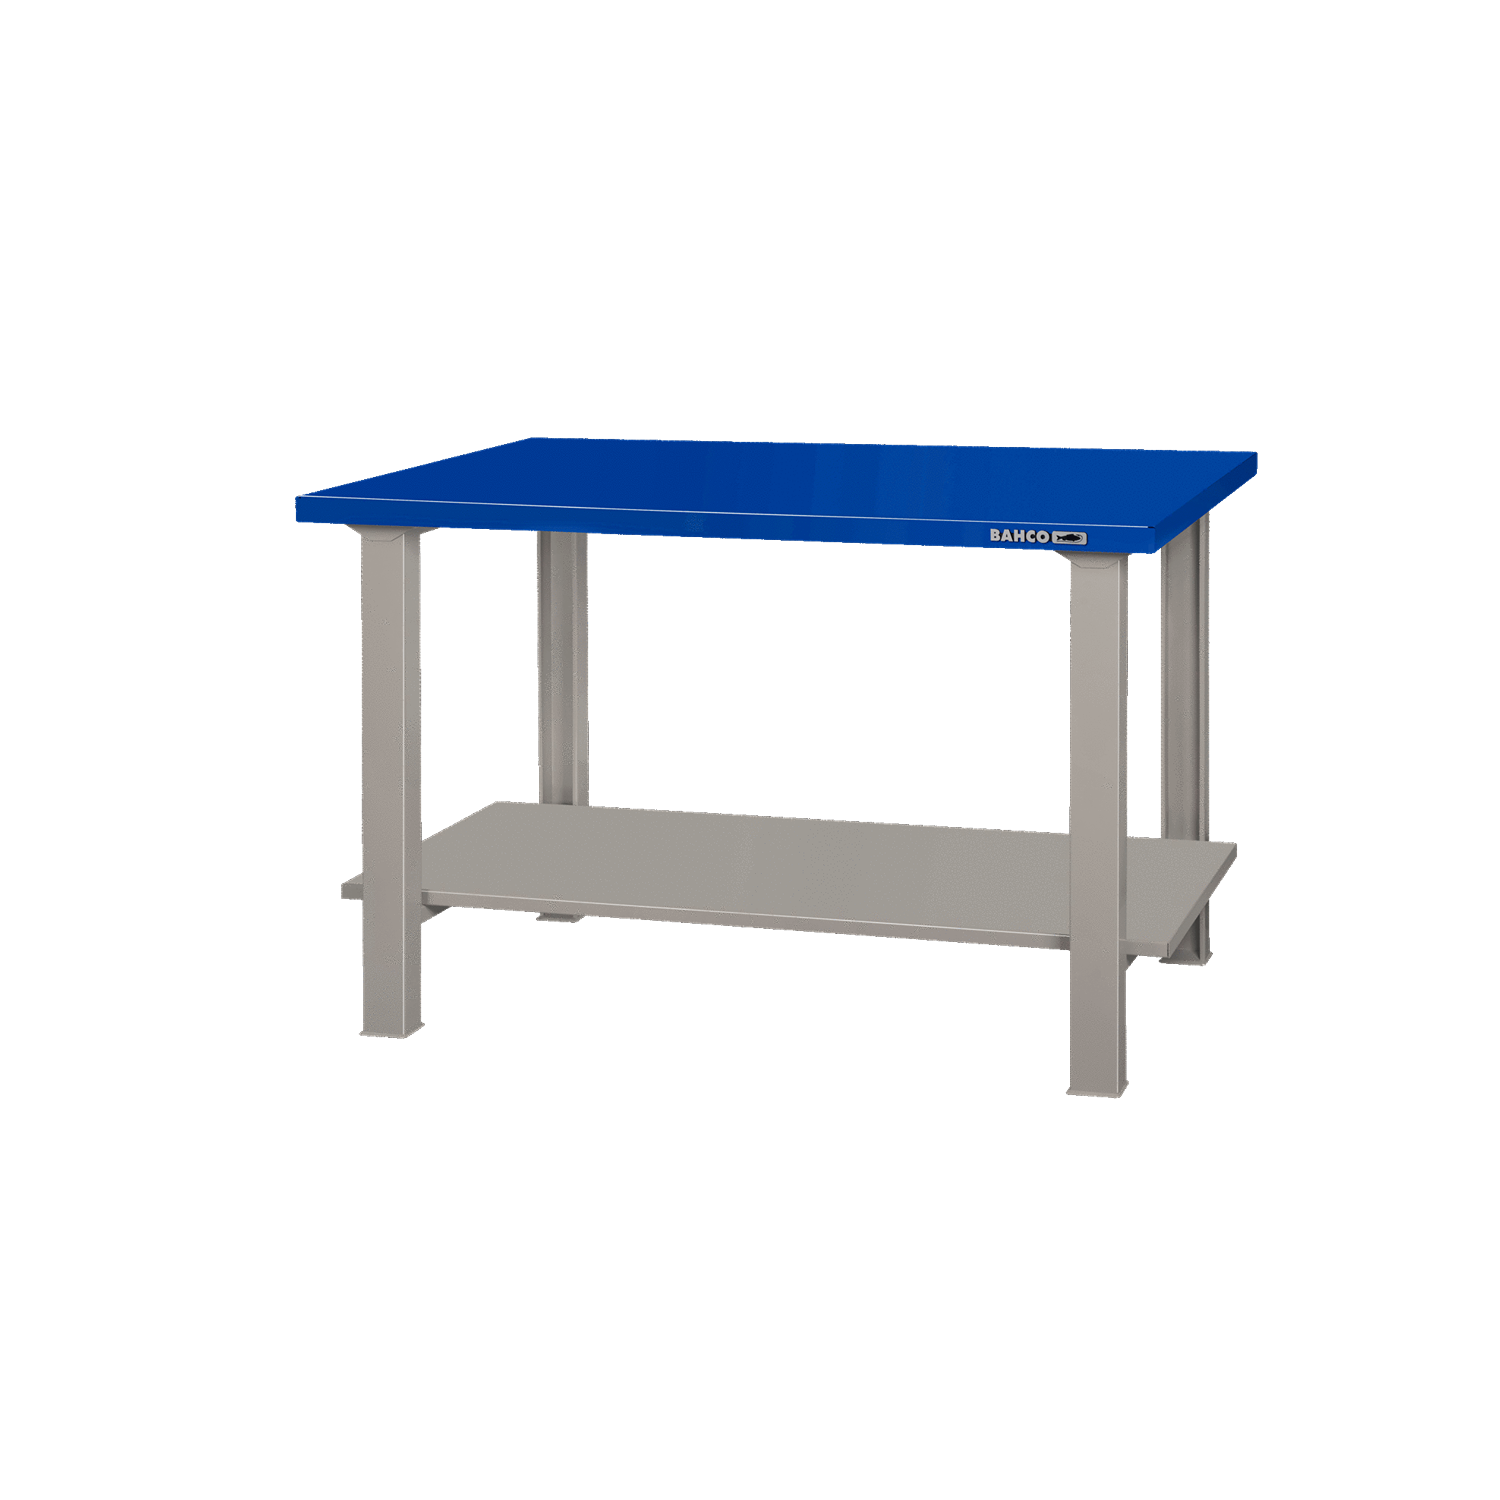 BAHCO 1495WB15TSBT Heavy Duty Steel Top Workbenches & Bottom Tray - Premium Steel Top Workbenches from BAHCO - Shop now at Yew Aik.